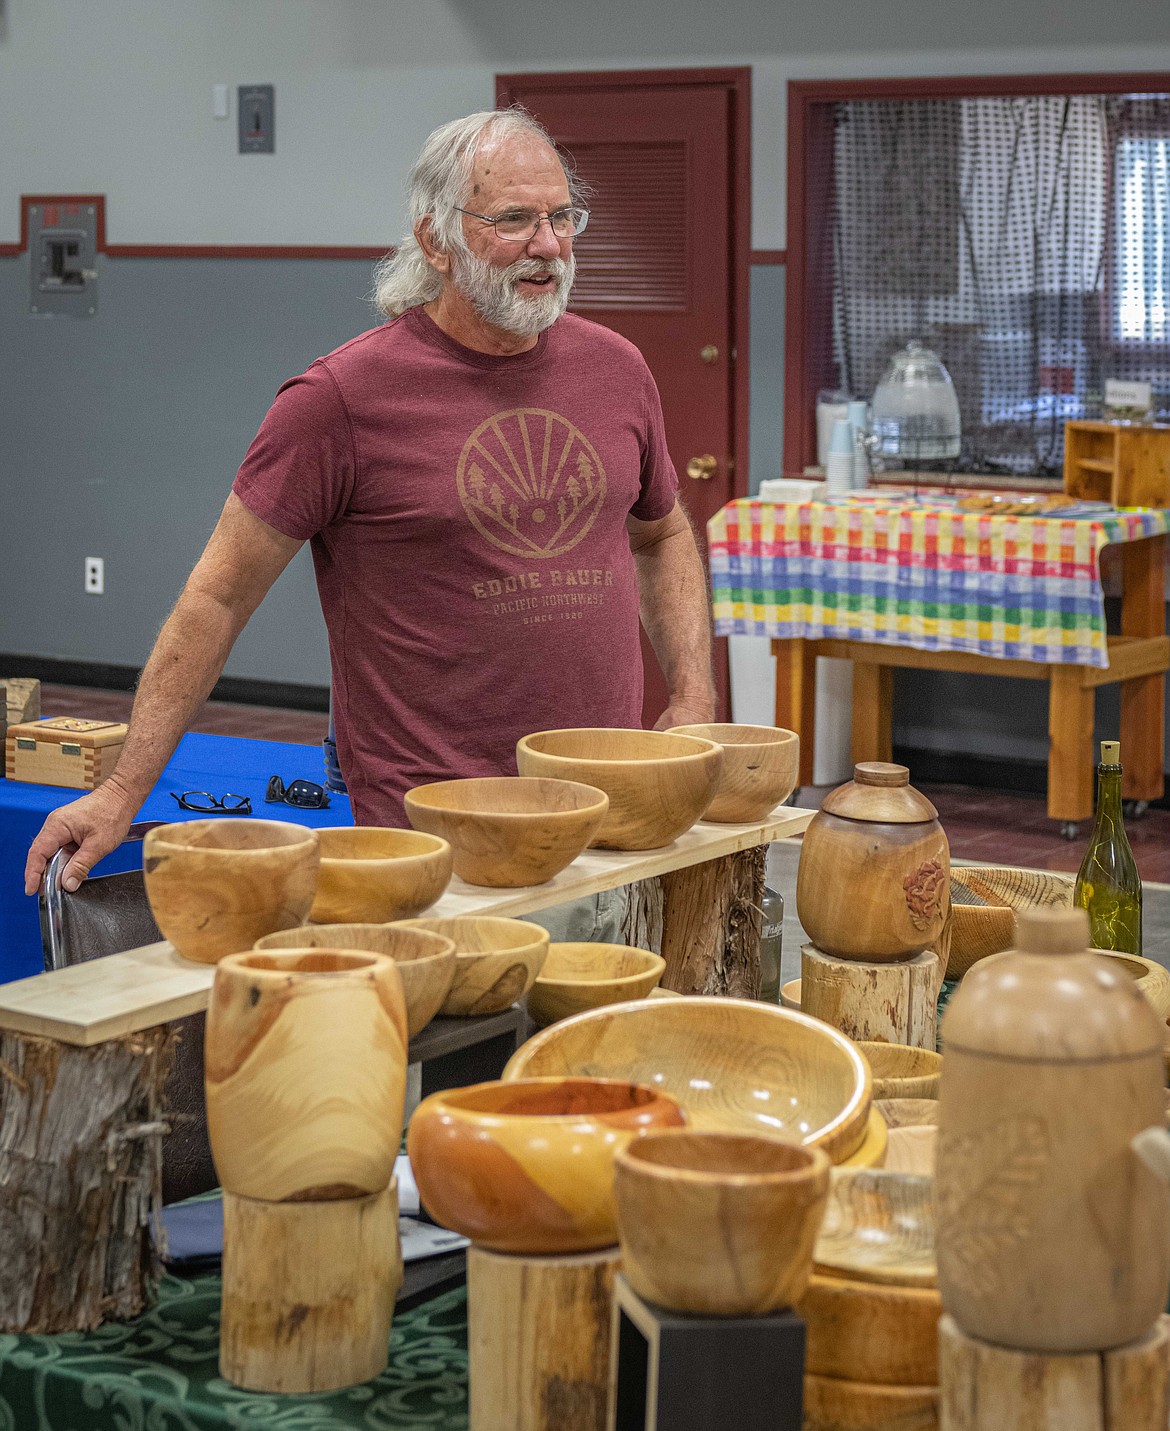 Woodworker Brad Stacey with his wooden bowl creations.